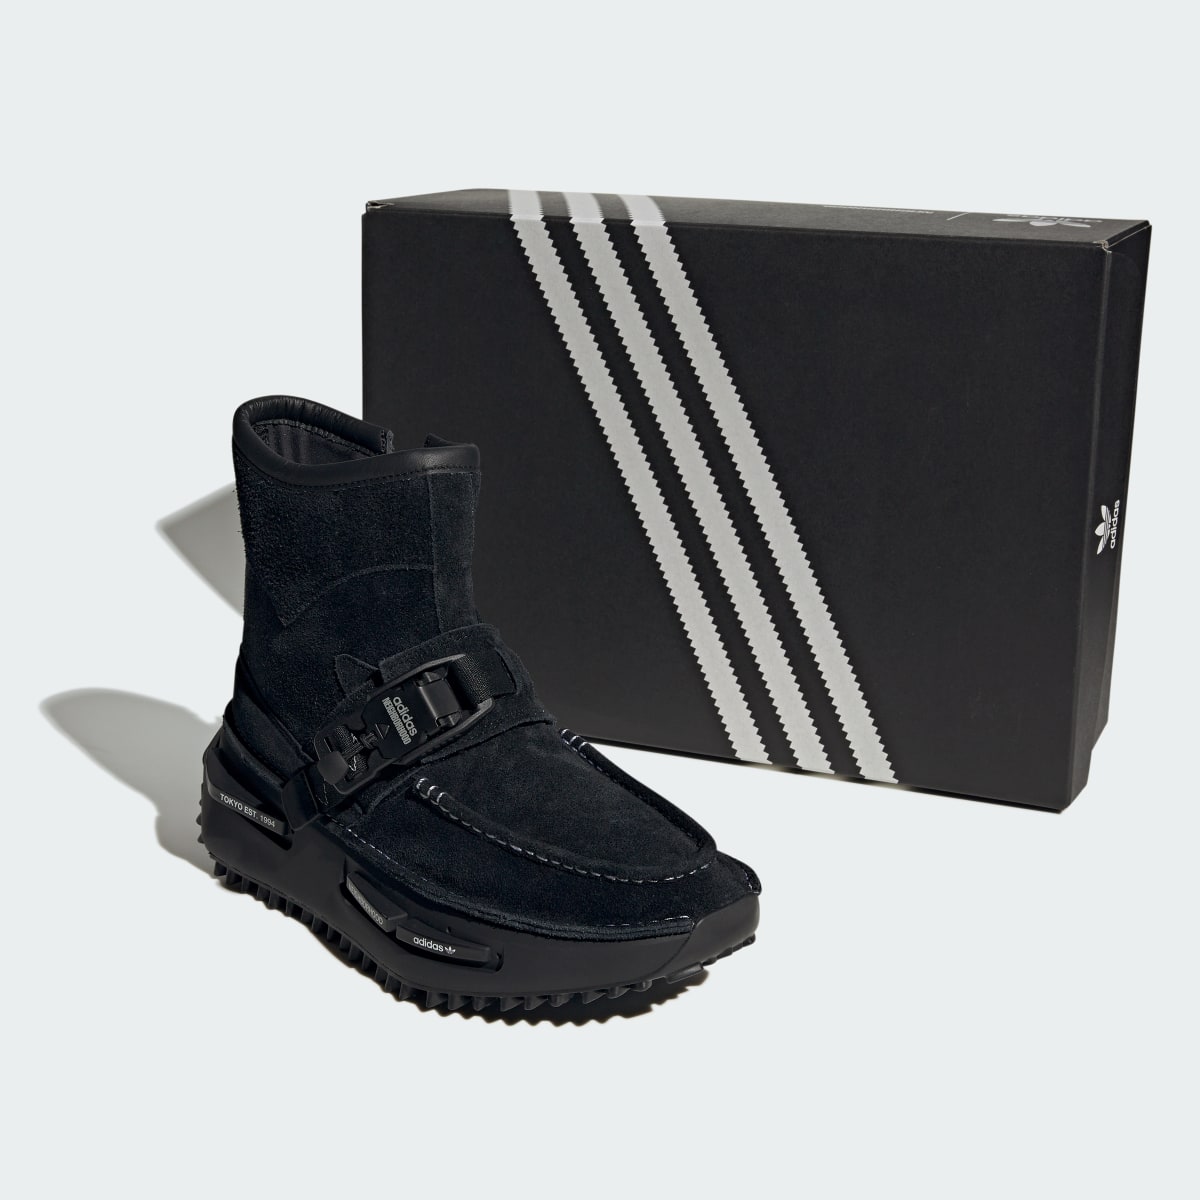 Adidas NMD_S1 N BOOTS. 10